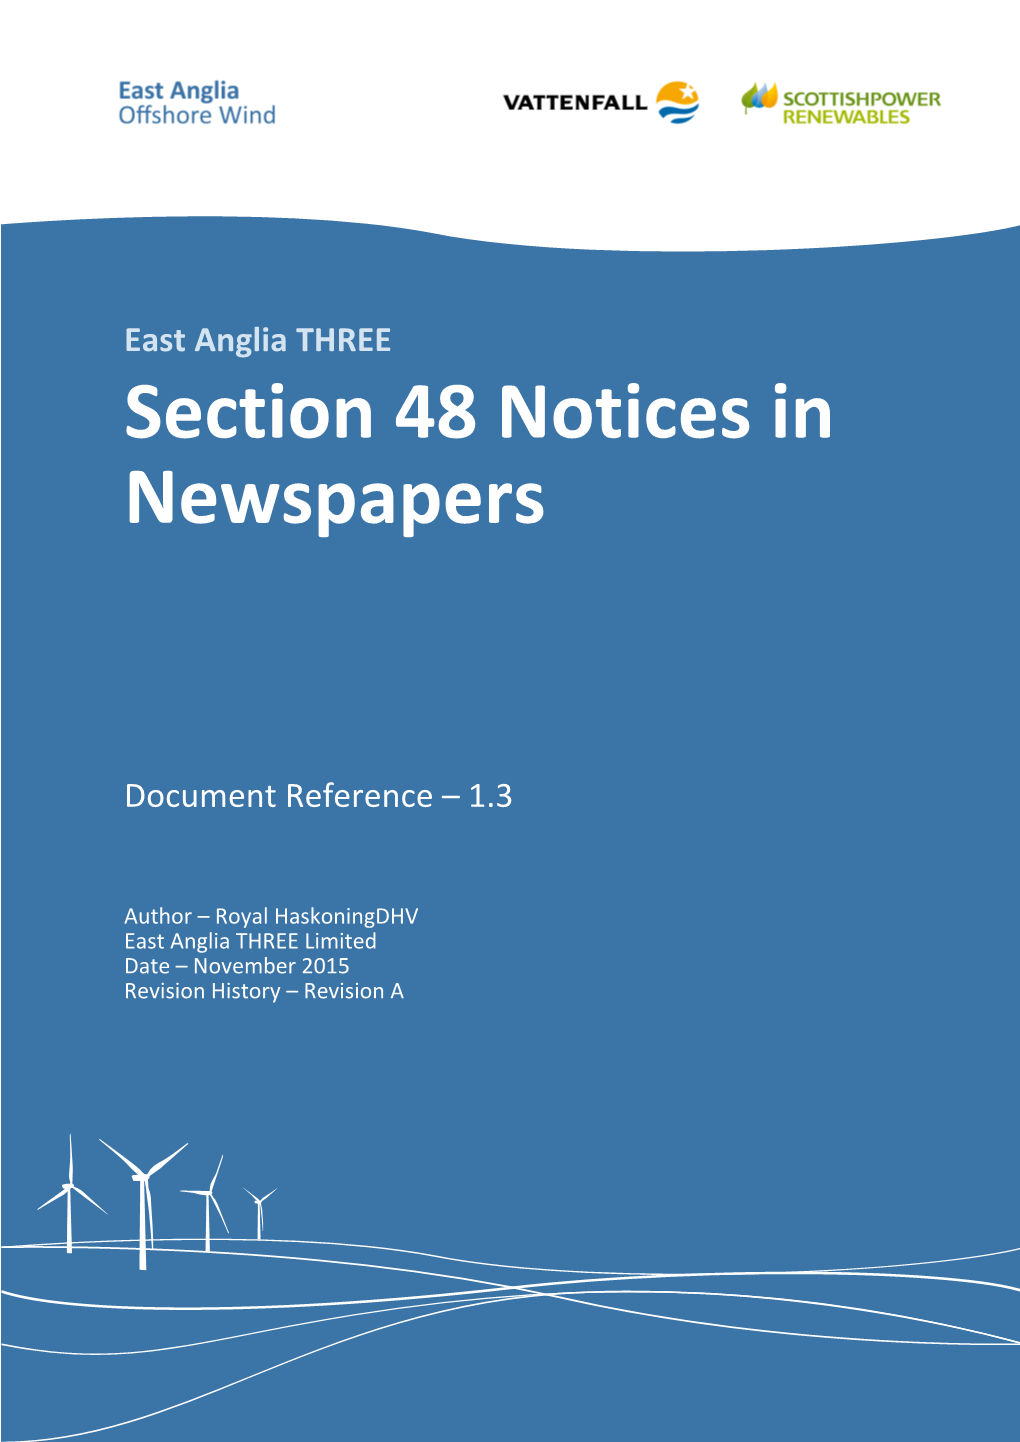 Section 48 Notices in Newspapers